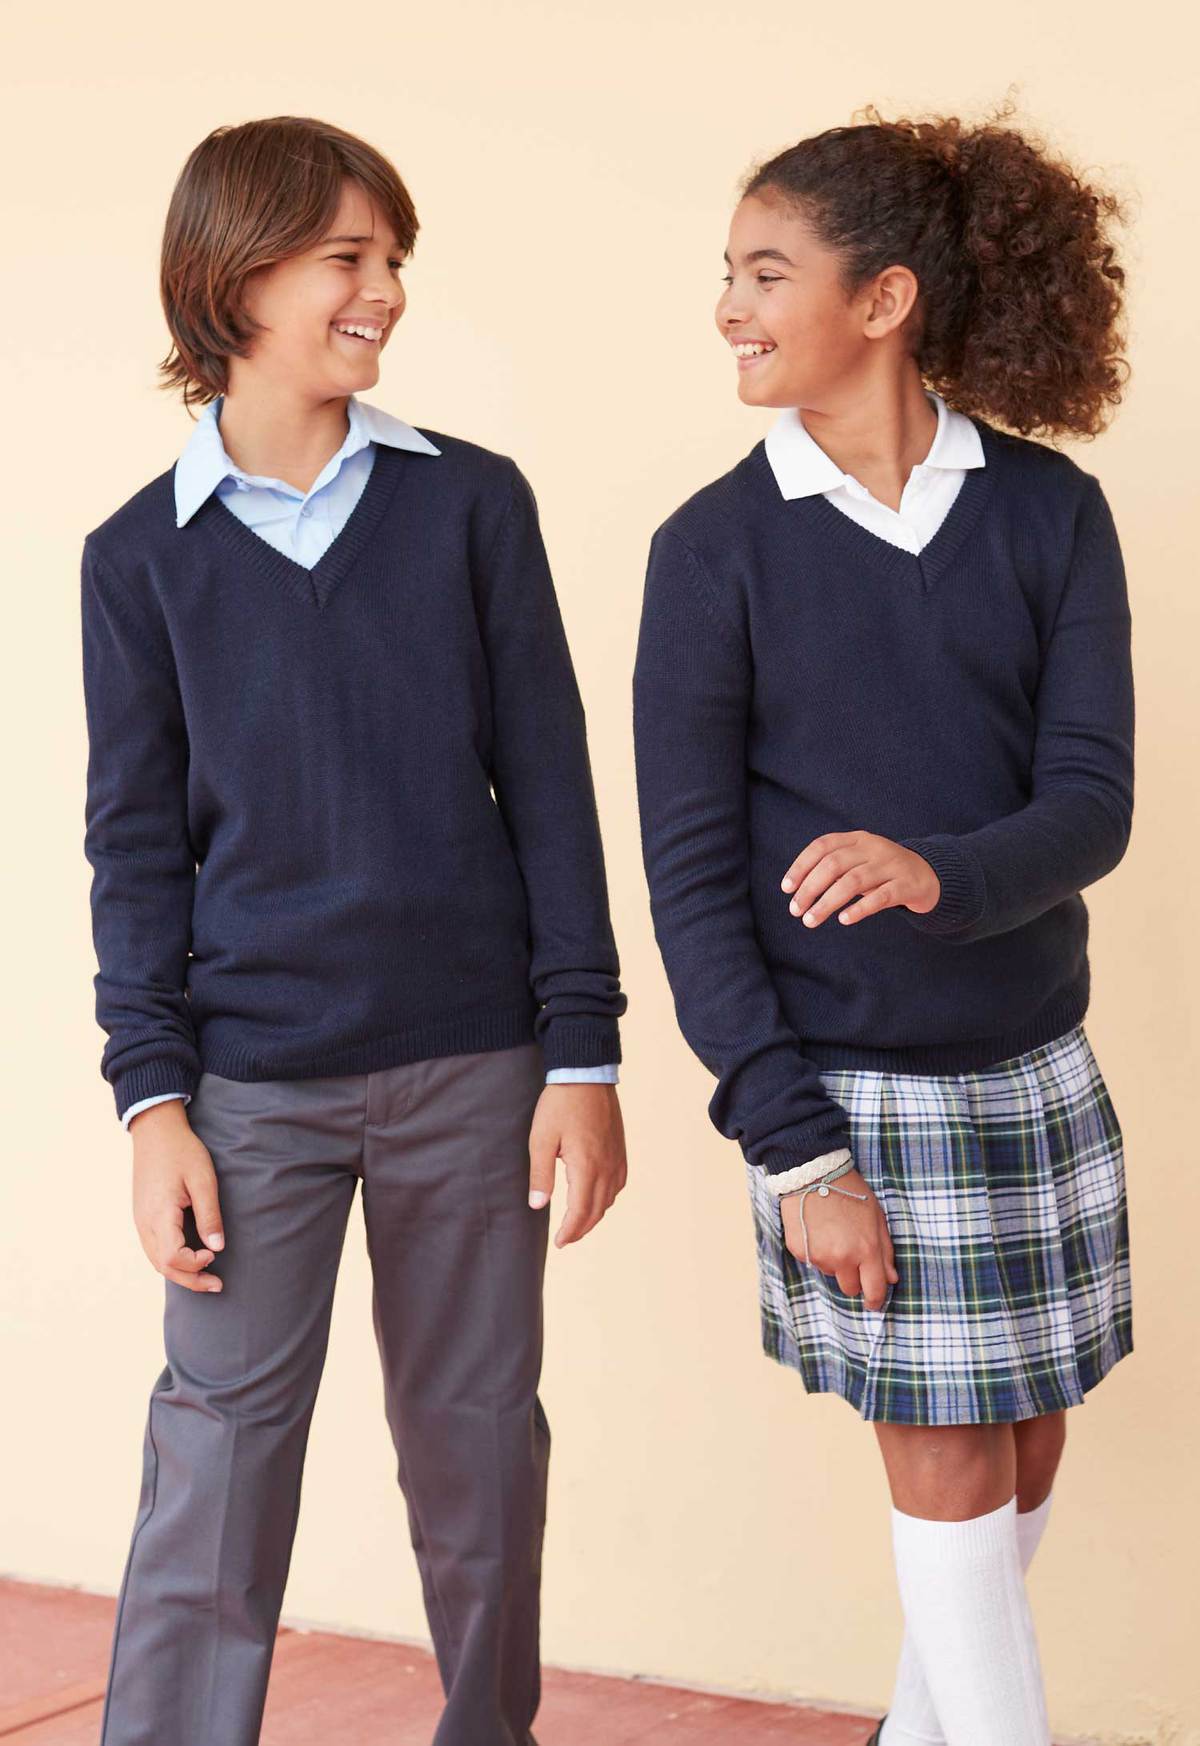 French Toast: Kids School Uniforms - High Quality, Durable Uniforms for  Kids - French Toast